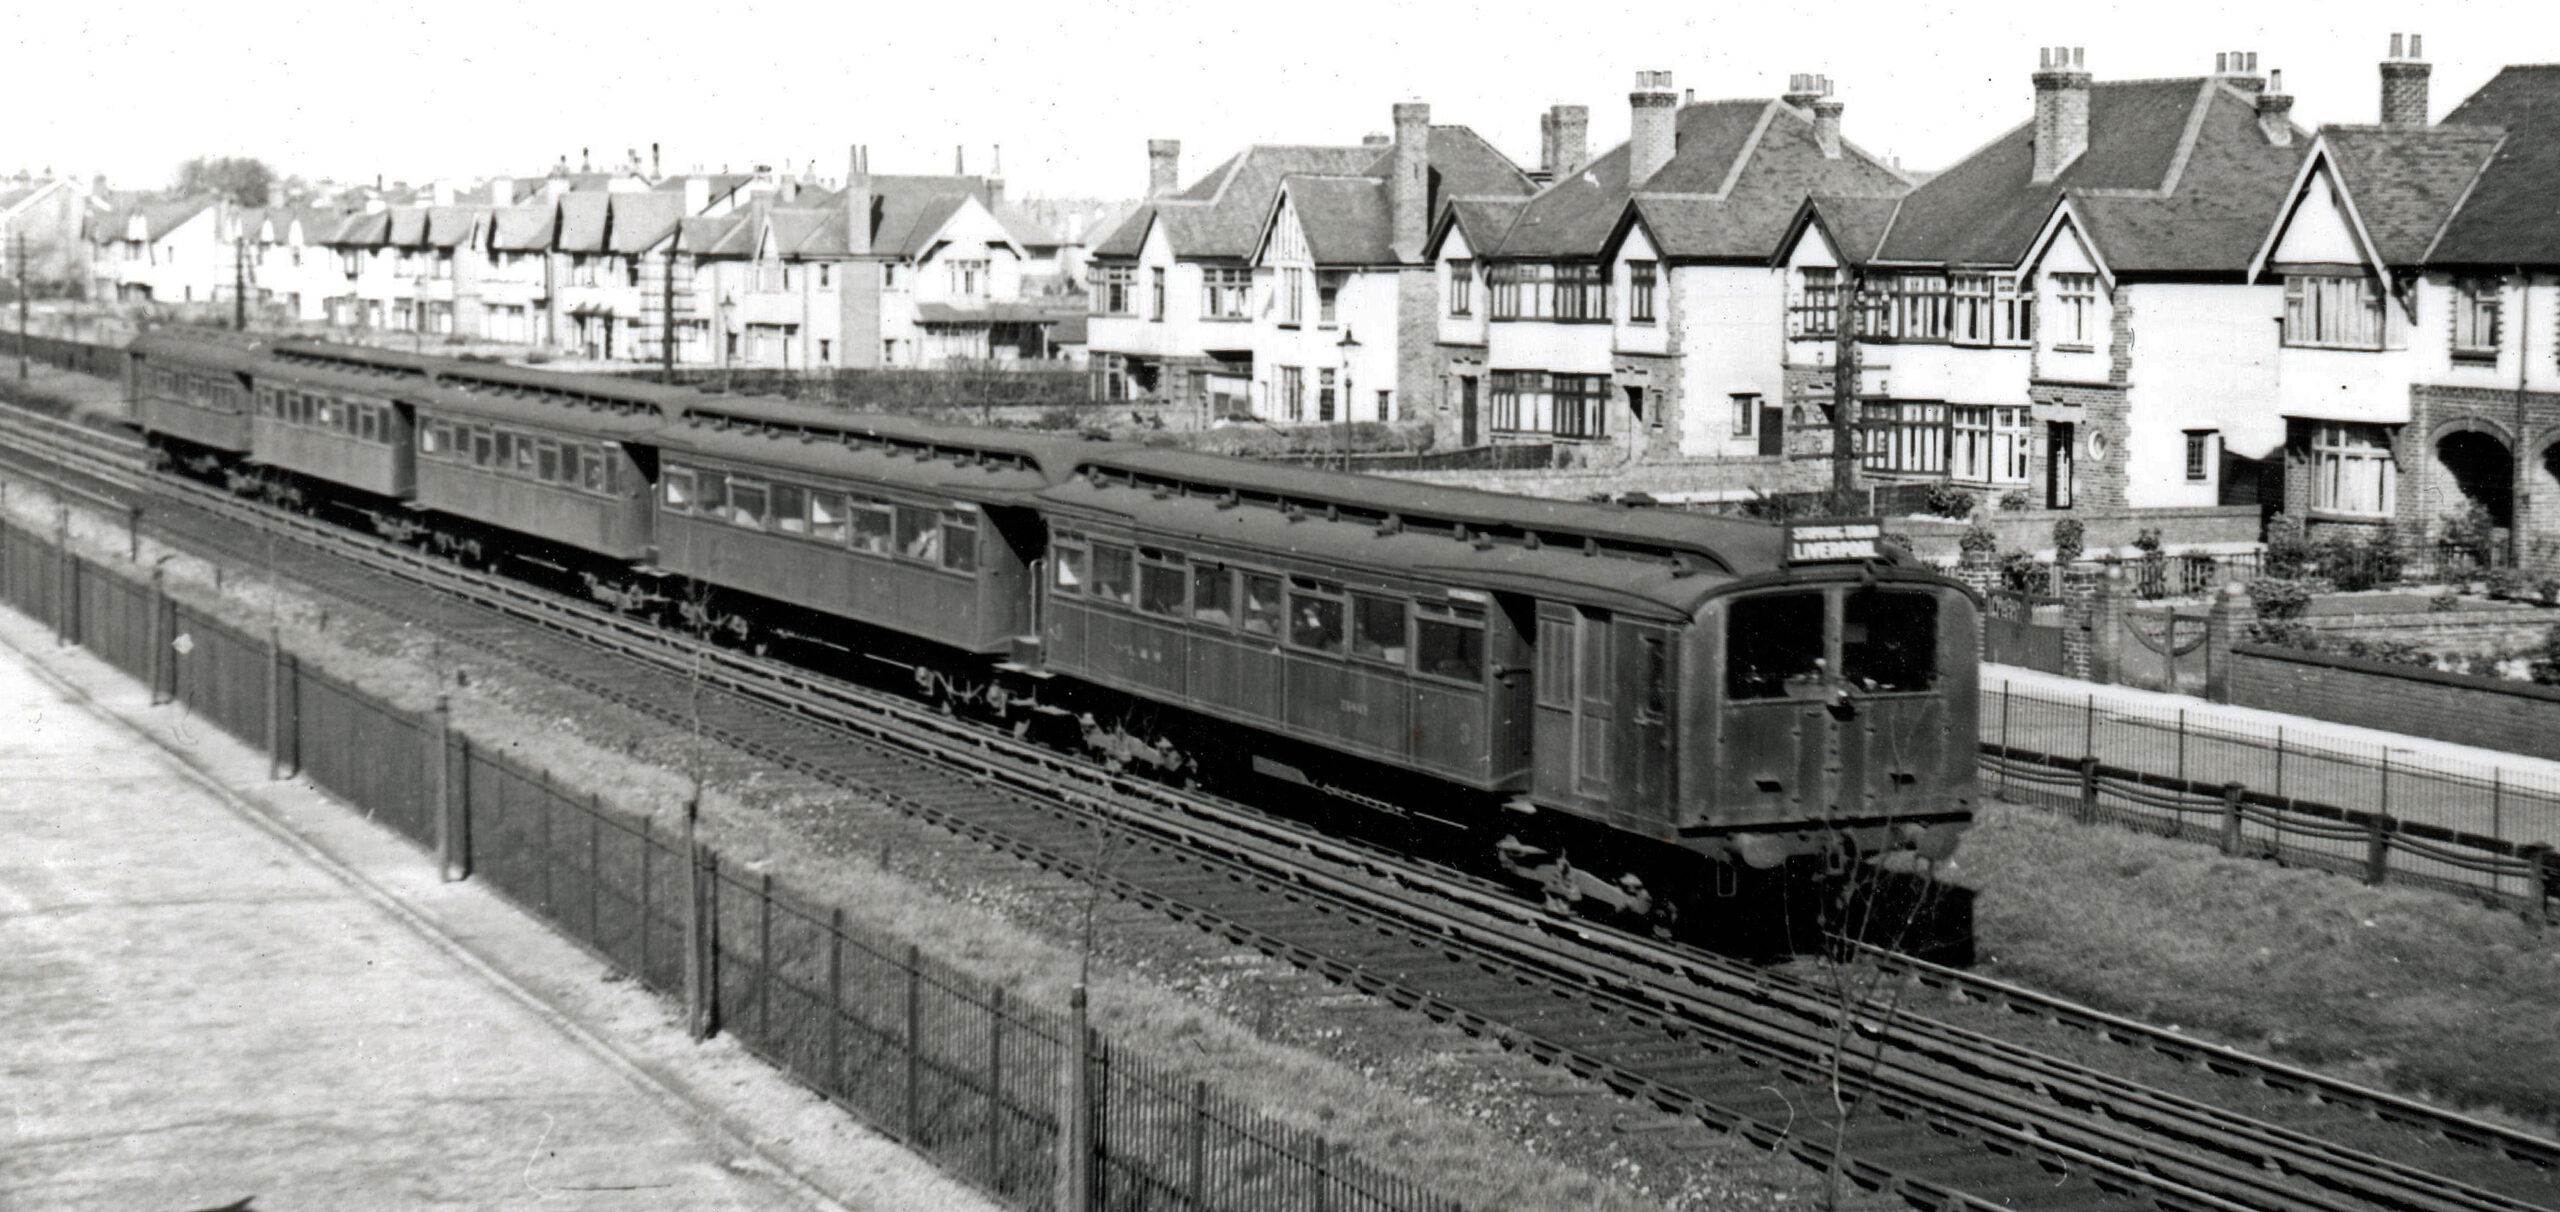 Merseyrail's Southport line is celebrating 120 years of electric train services  L&Y Stock 1935 - Hillside. (Paul Gorton Collection)